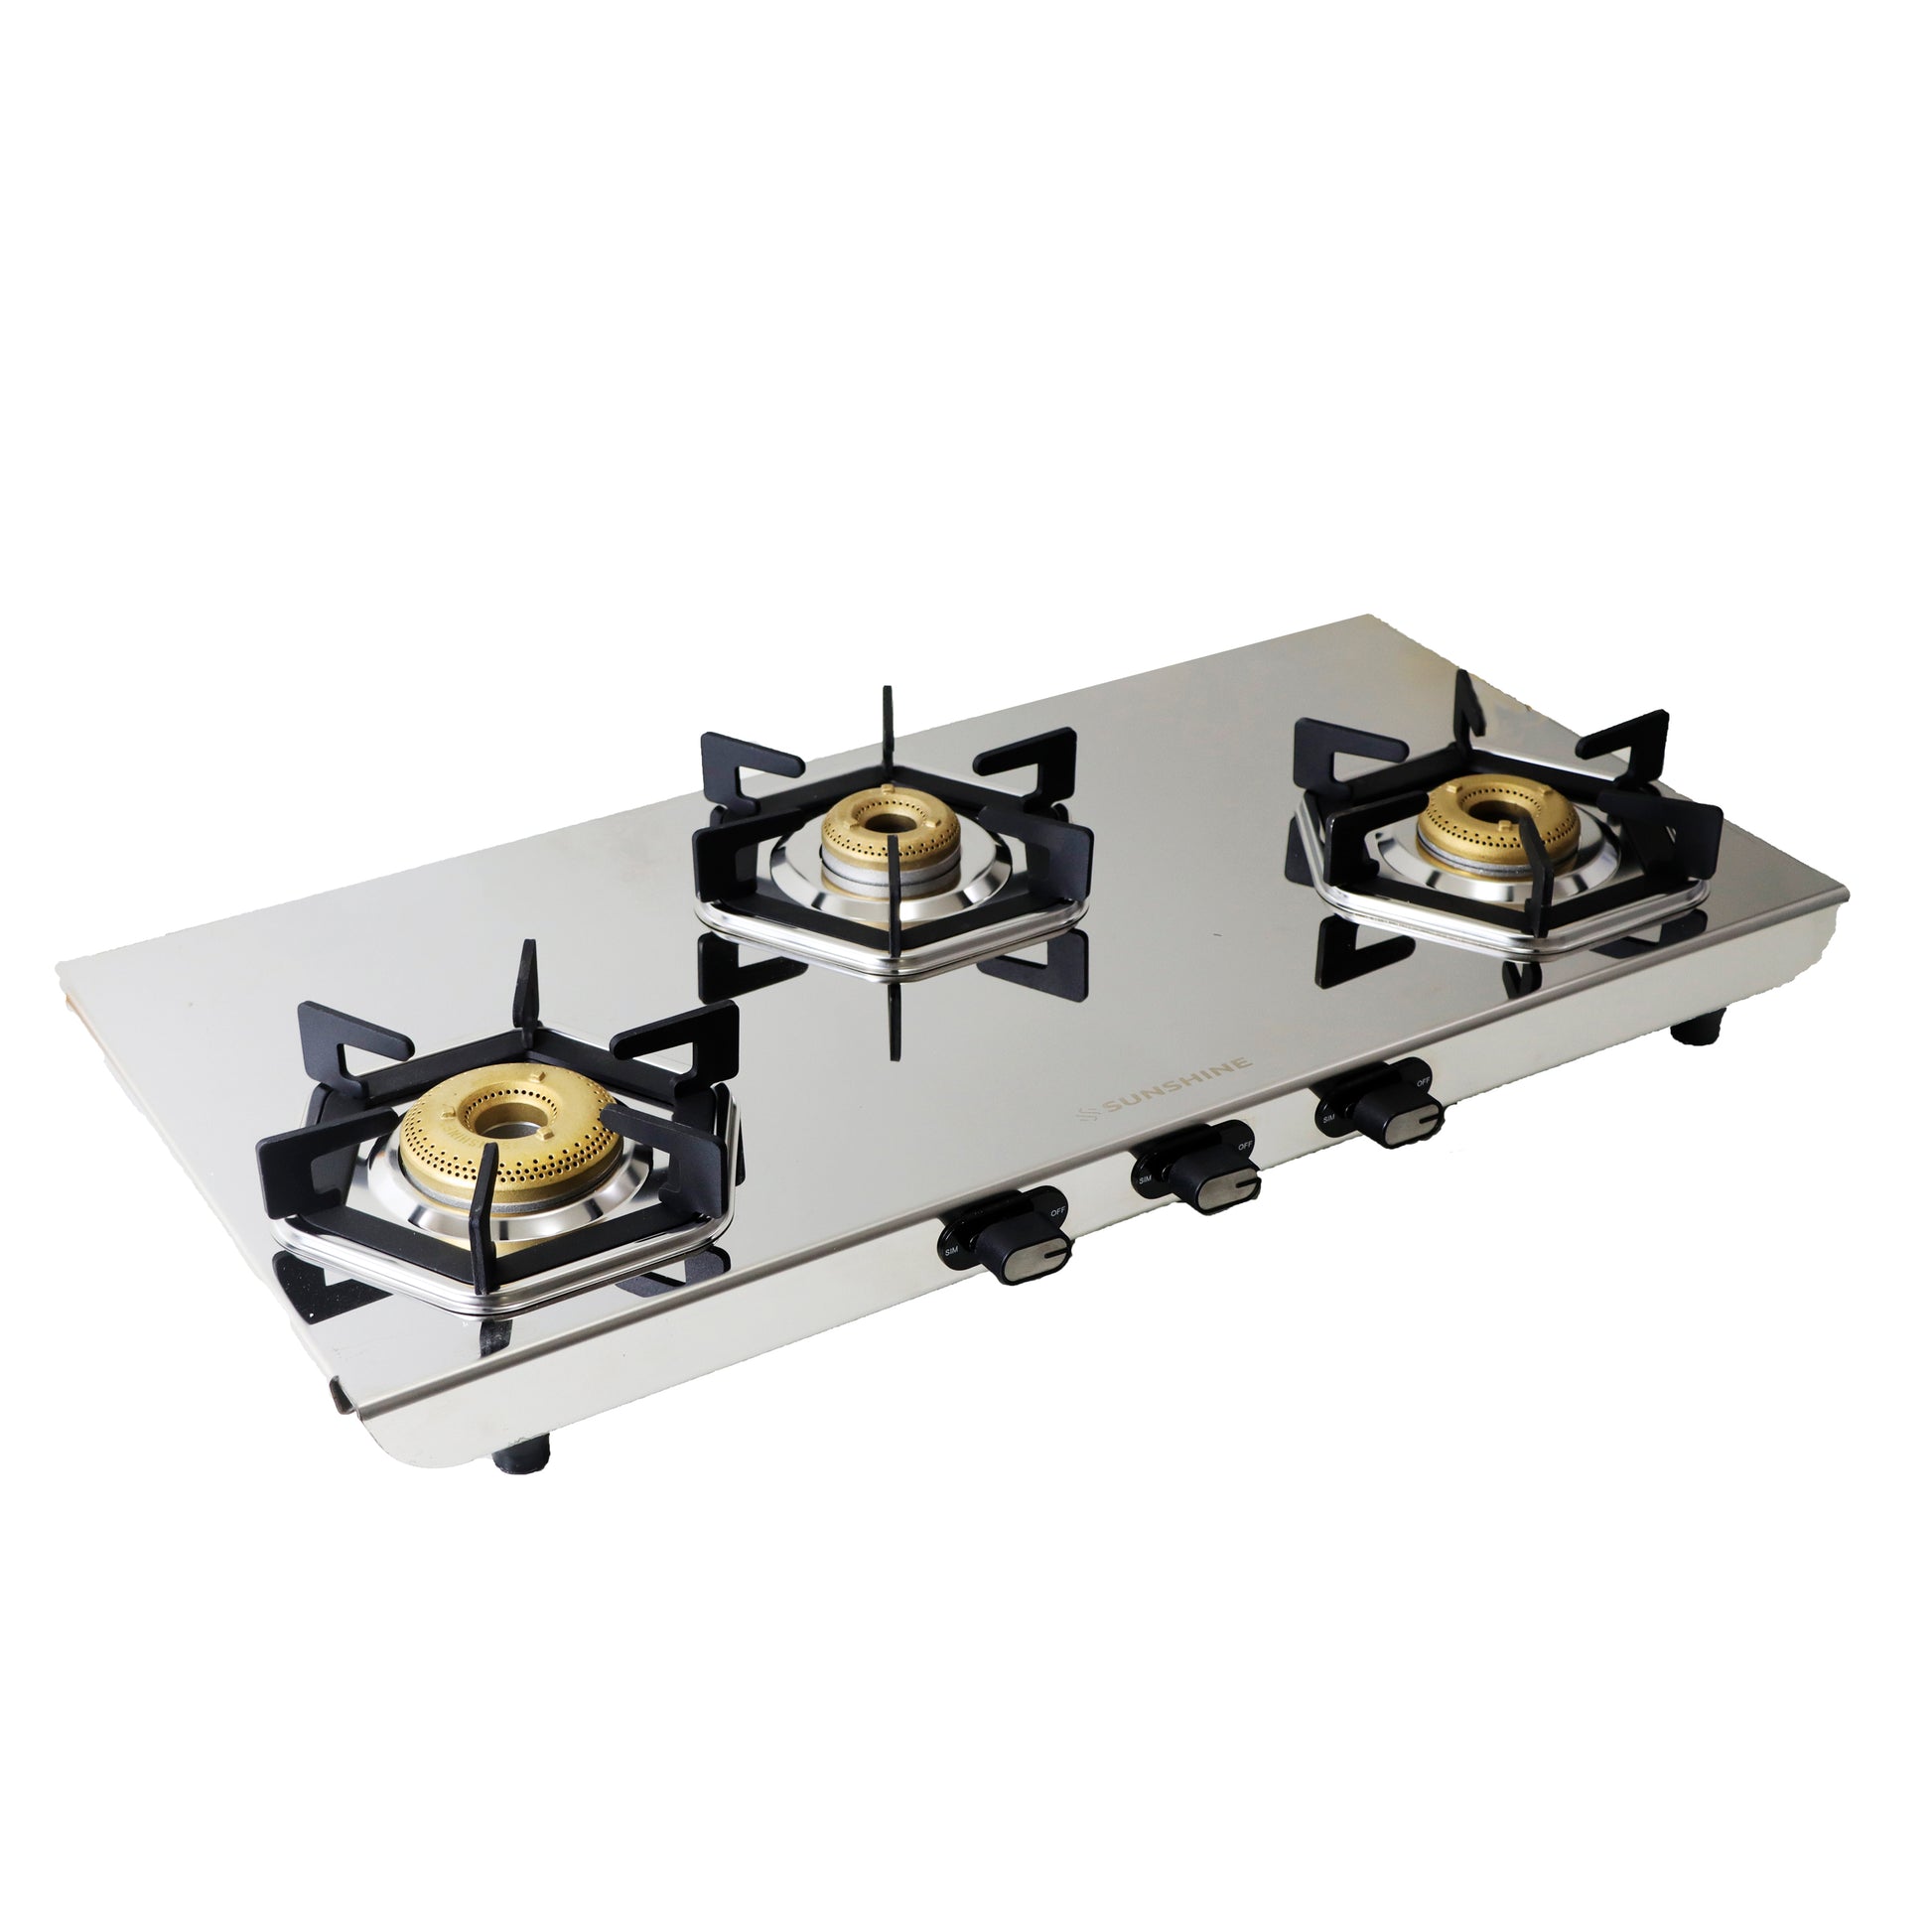 Sunshine Enzo Stainless Steel Cooktop, ISI Certified Manual Ignition 3 Burner Gas Stove, 2 Years General Warranty